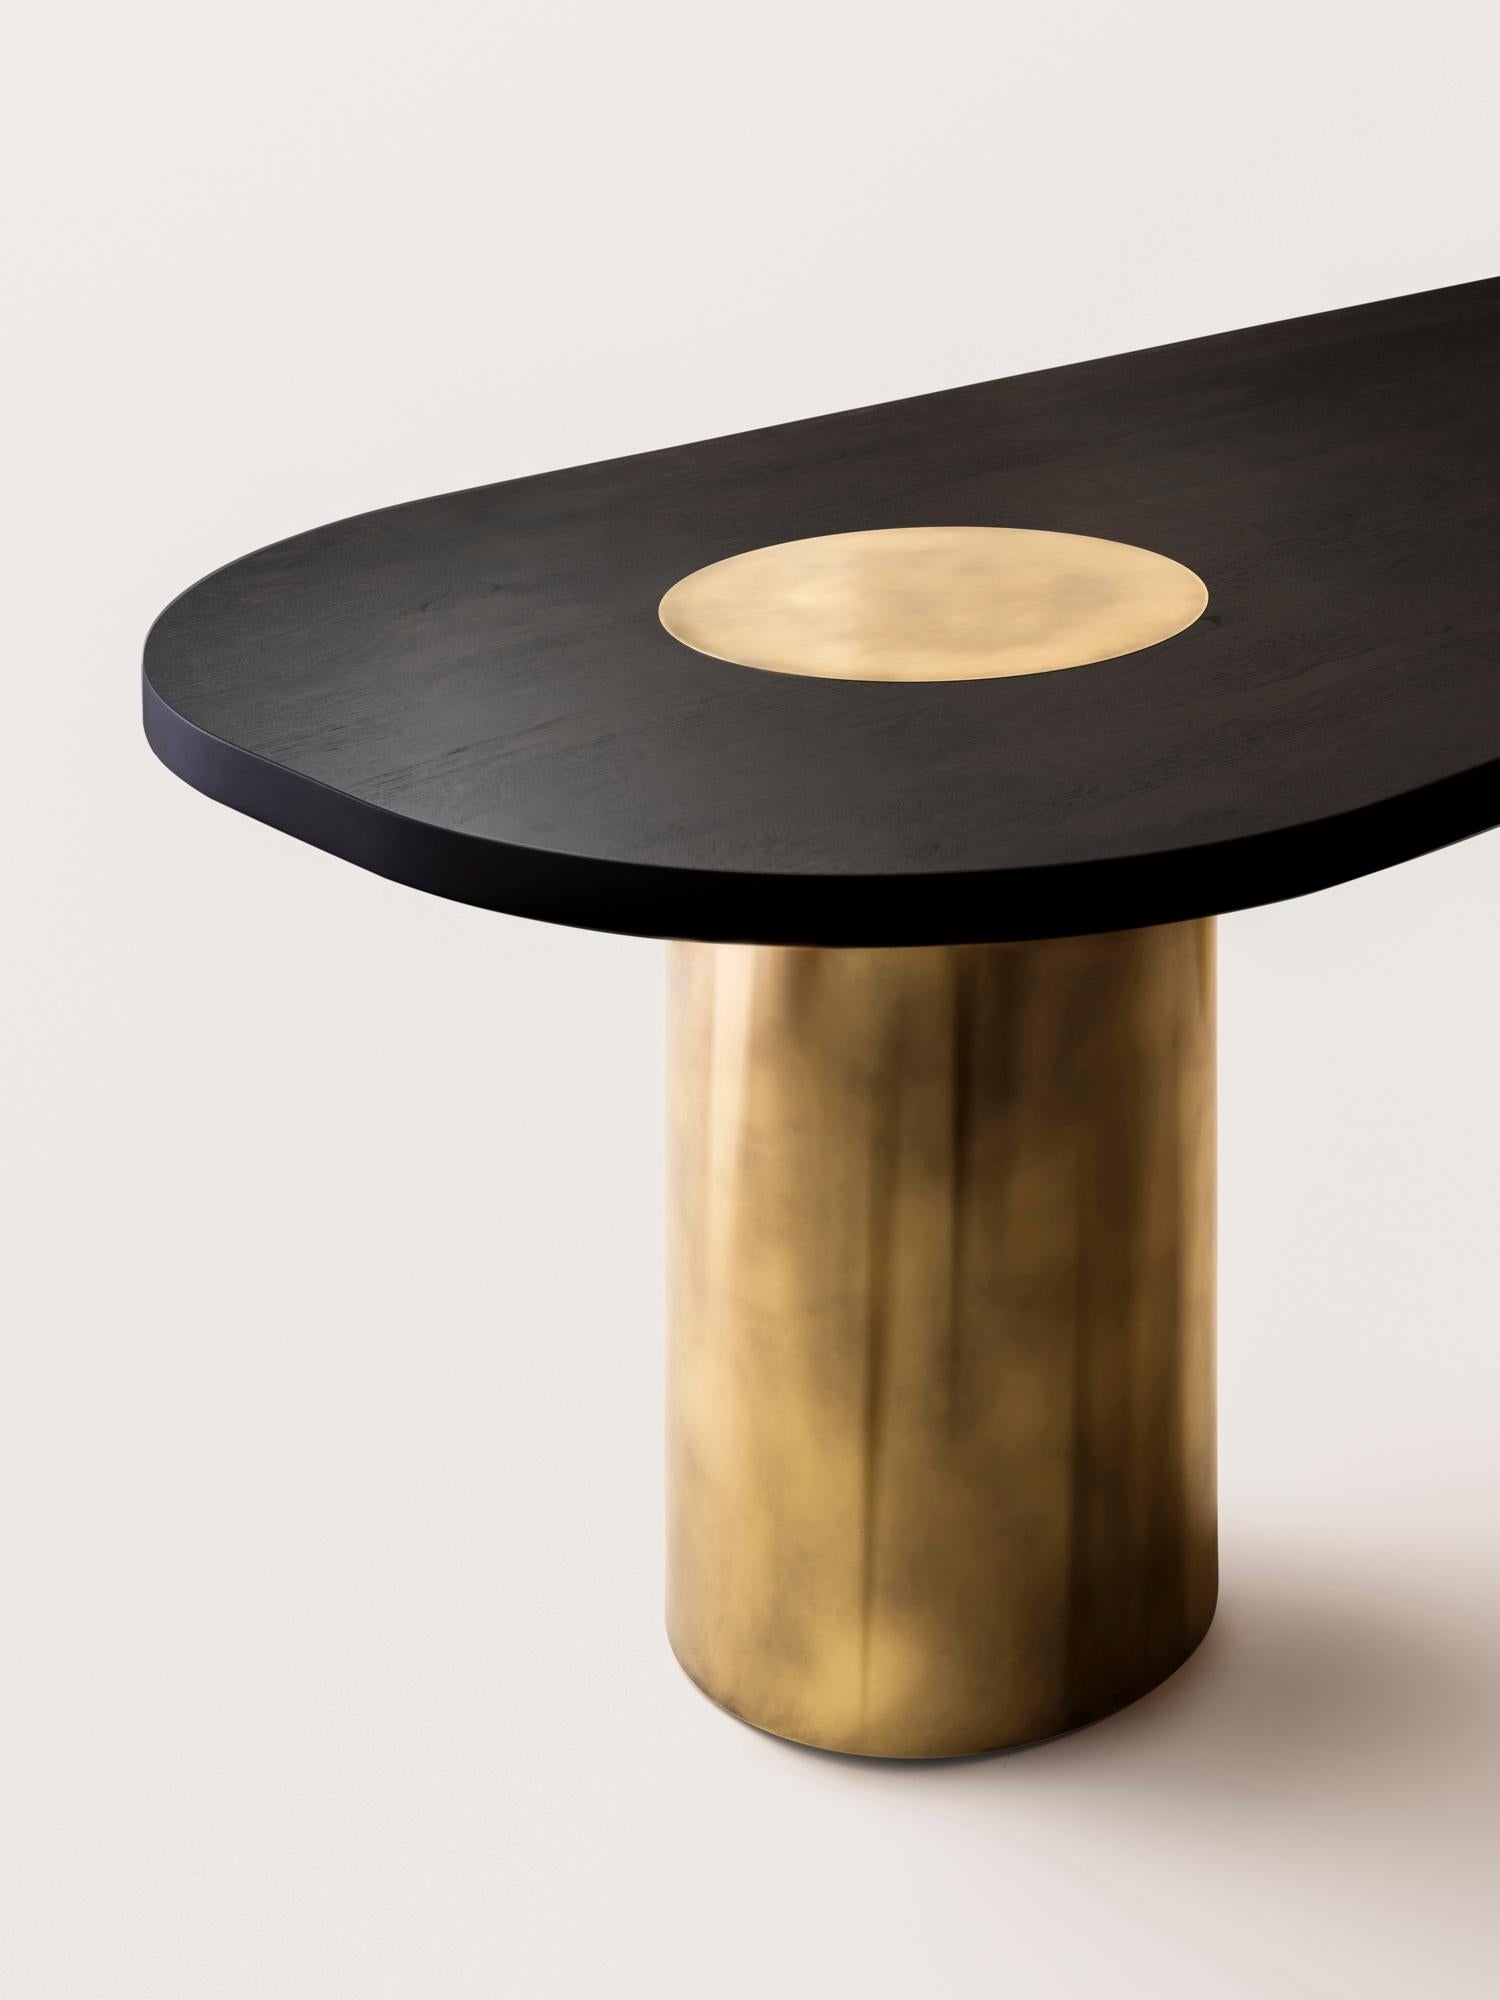 Silo Dining Table - Ebonized Walnut and Burnished Brass In New Condition For Sale In New York, NY